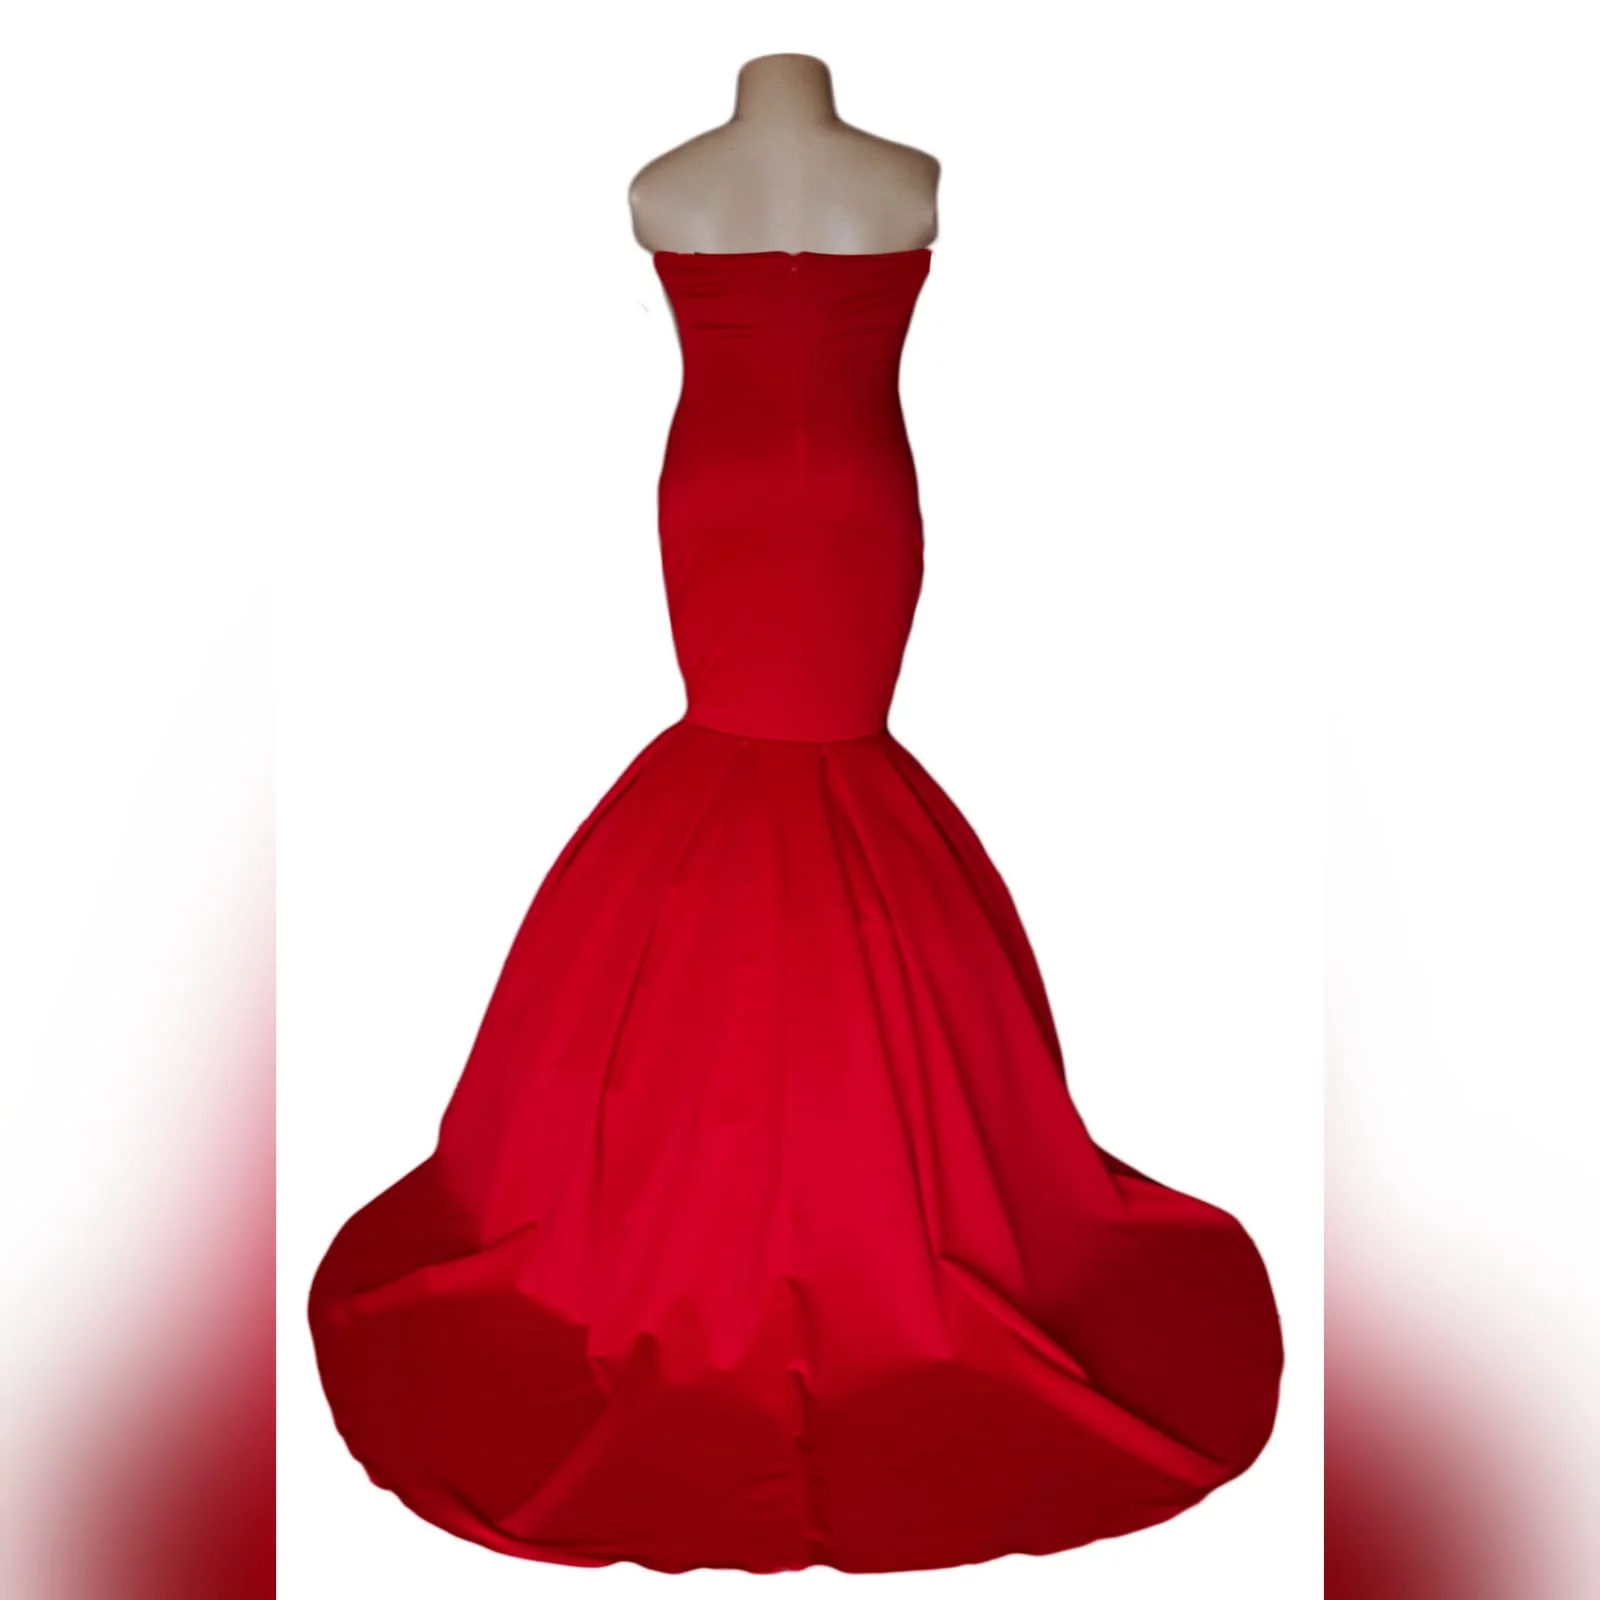 Bright red boobtube mermaid prom dress 6 bright red boobtube mermaid prom dress with a sweetheart neckline, bottom with volume and a train.